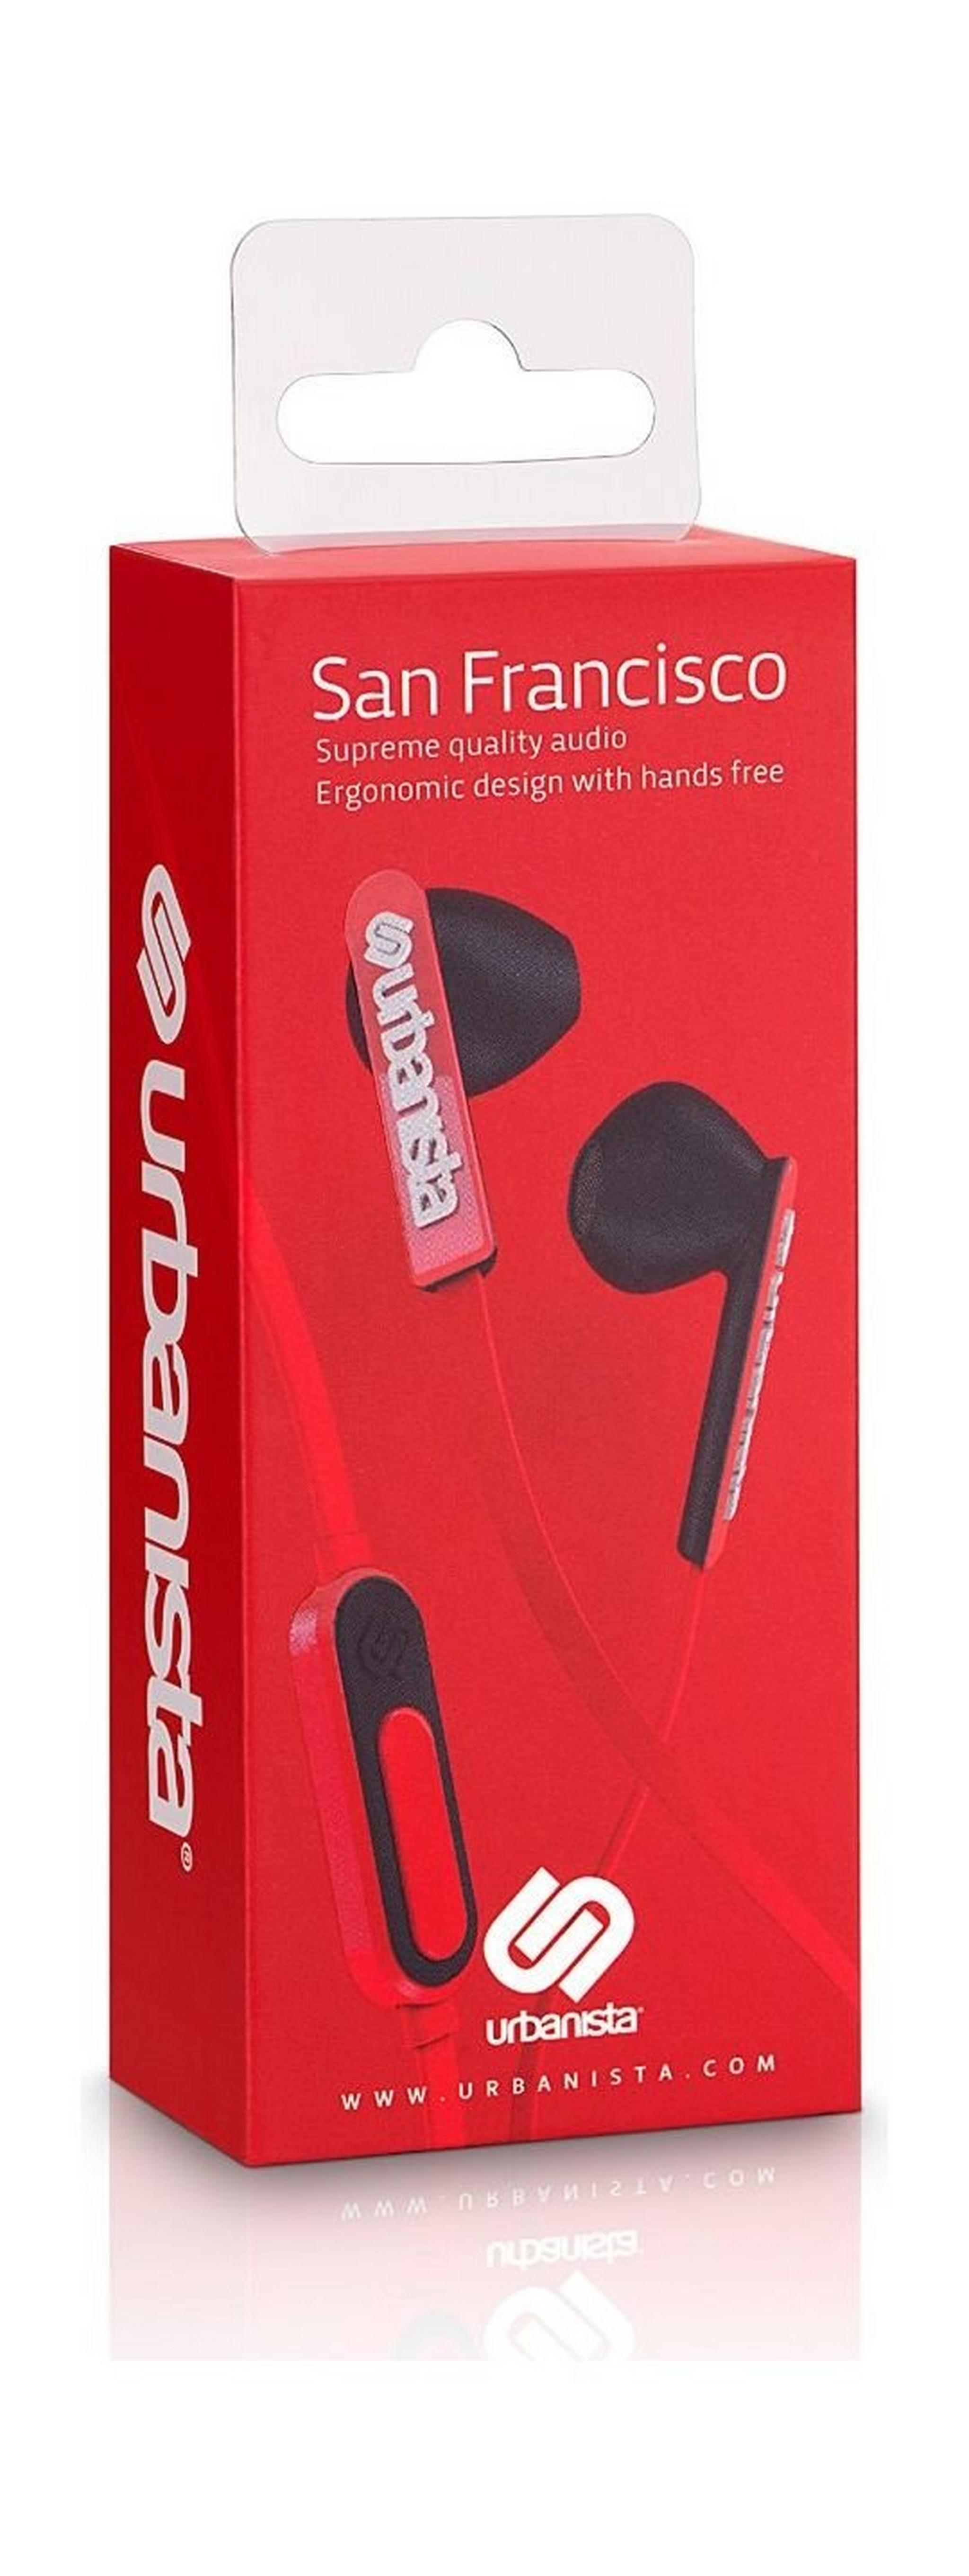 Urbanista San Francisco Wired In-ear Earphones with Mic URB-1032501 - Red